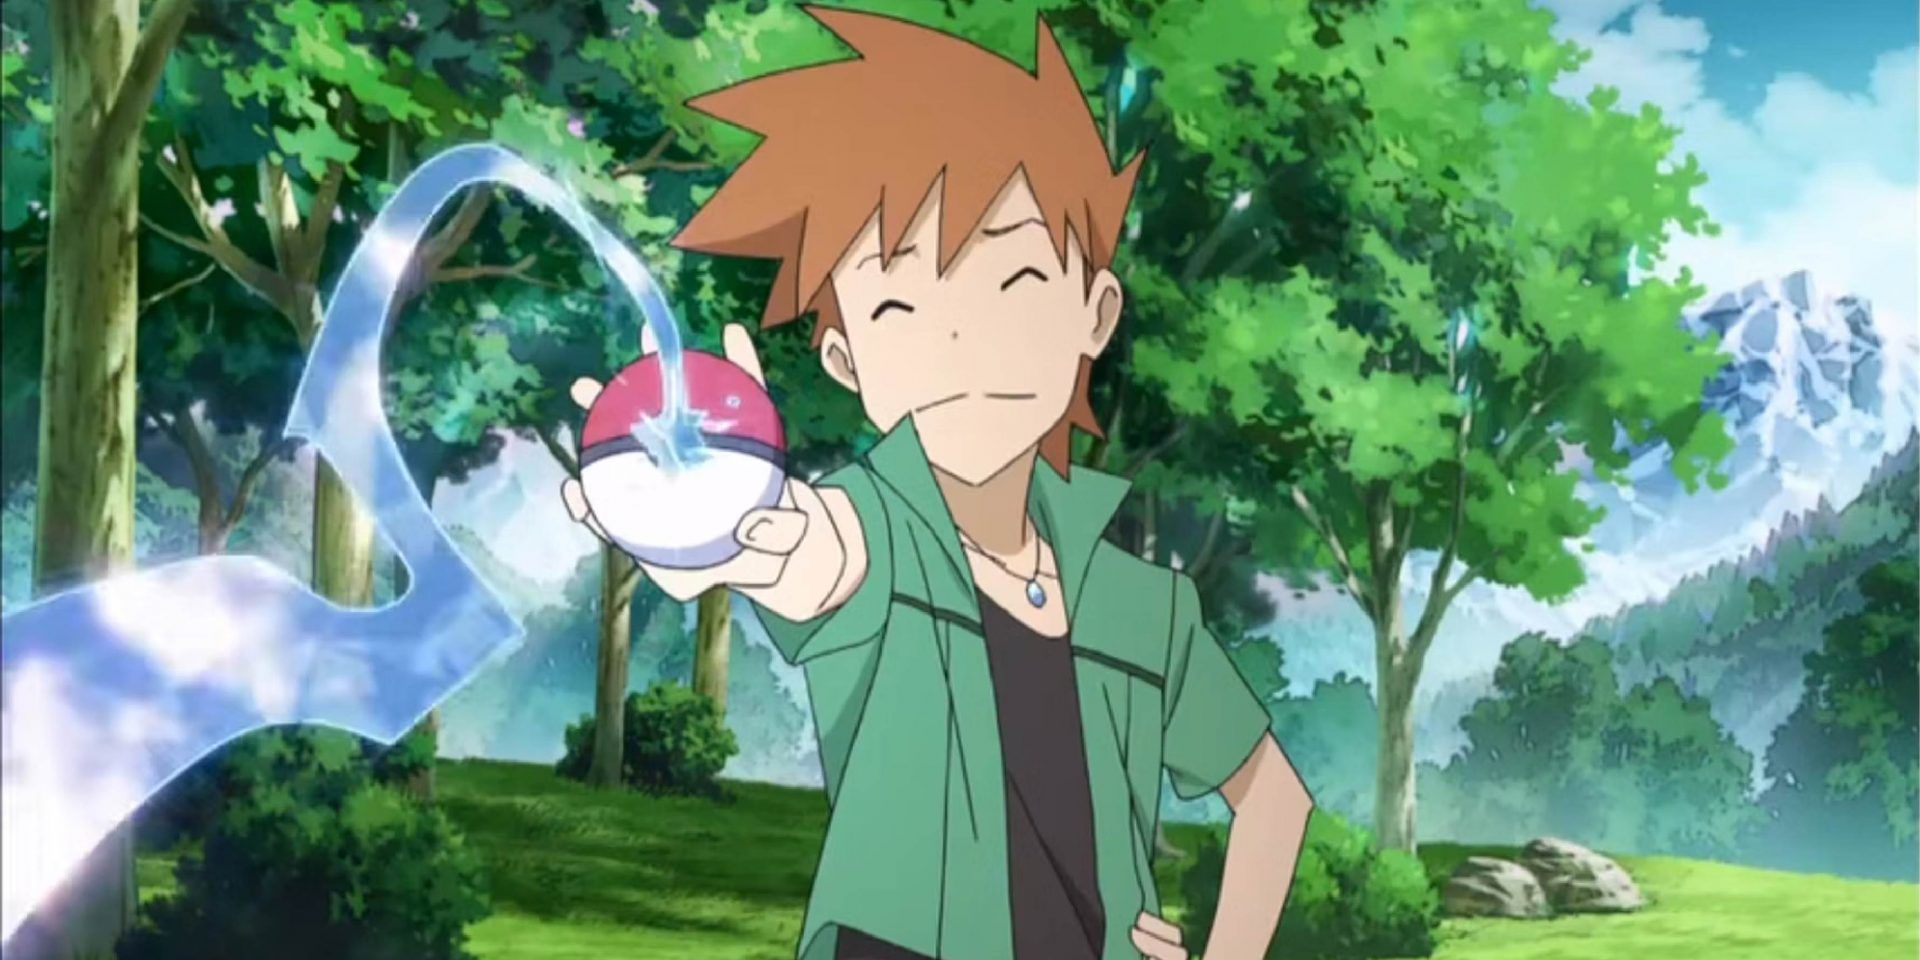 Blue from Pokémon looking cheeky as he releases one of his Pokémon.